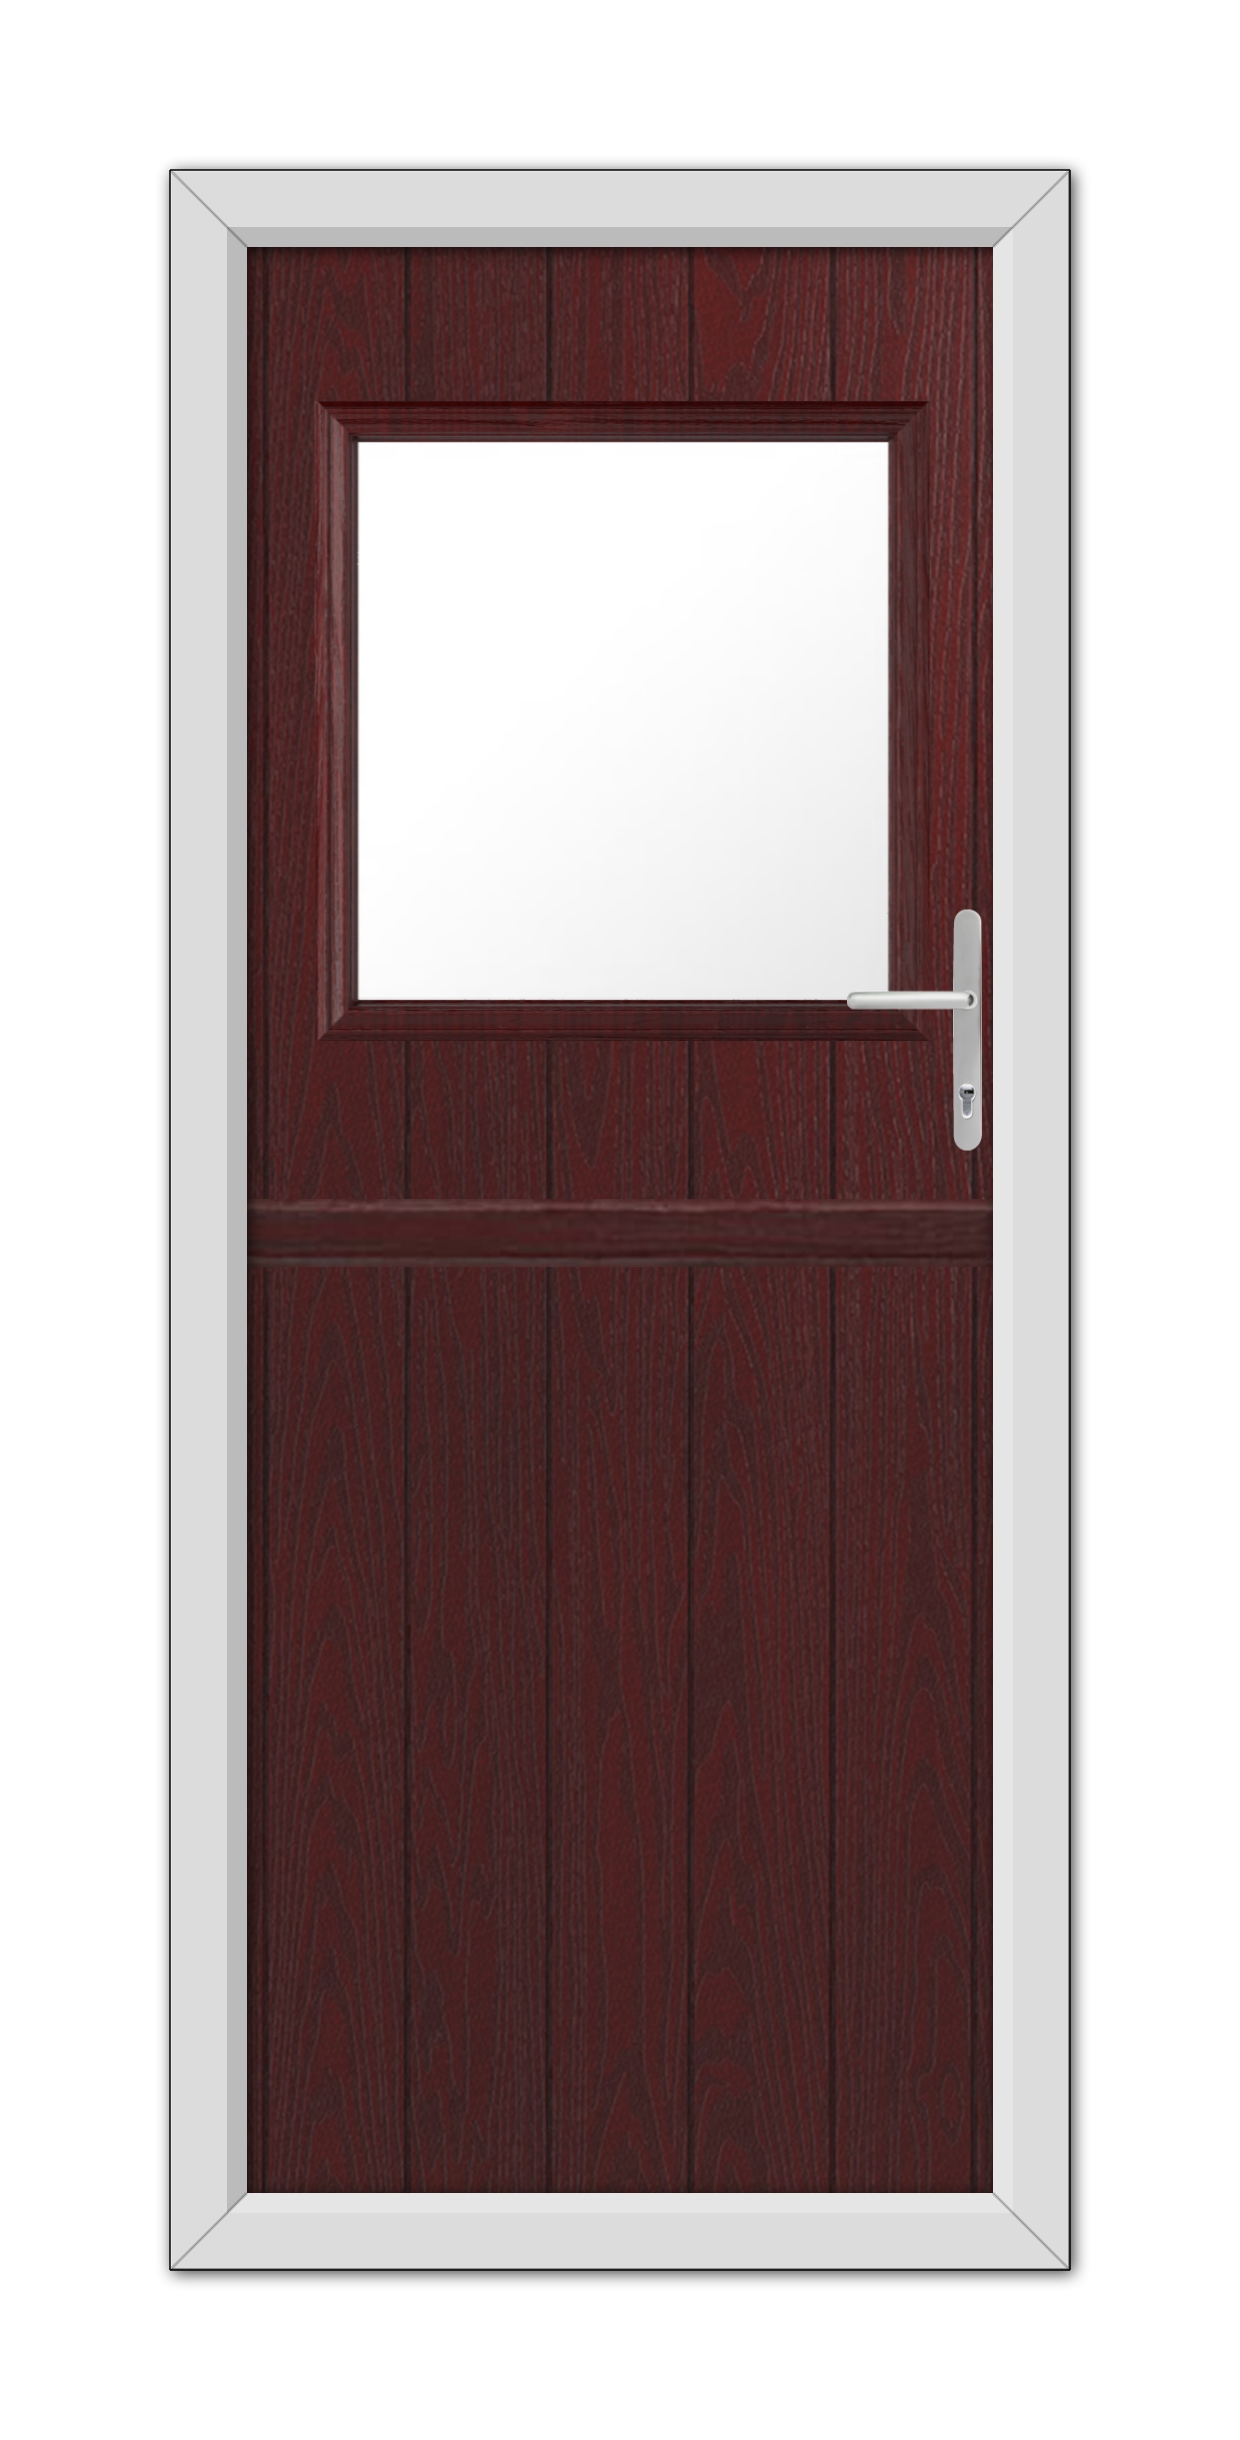 A Rosewood Fife Stable Composite Door with a square window at the top and a silver handle on the right, set within a white frame.